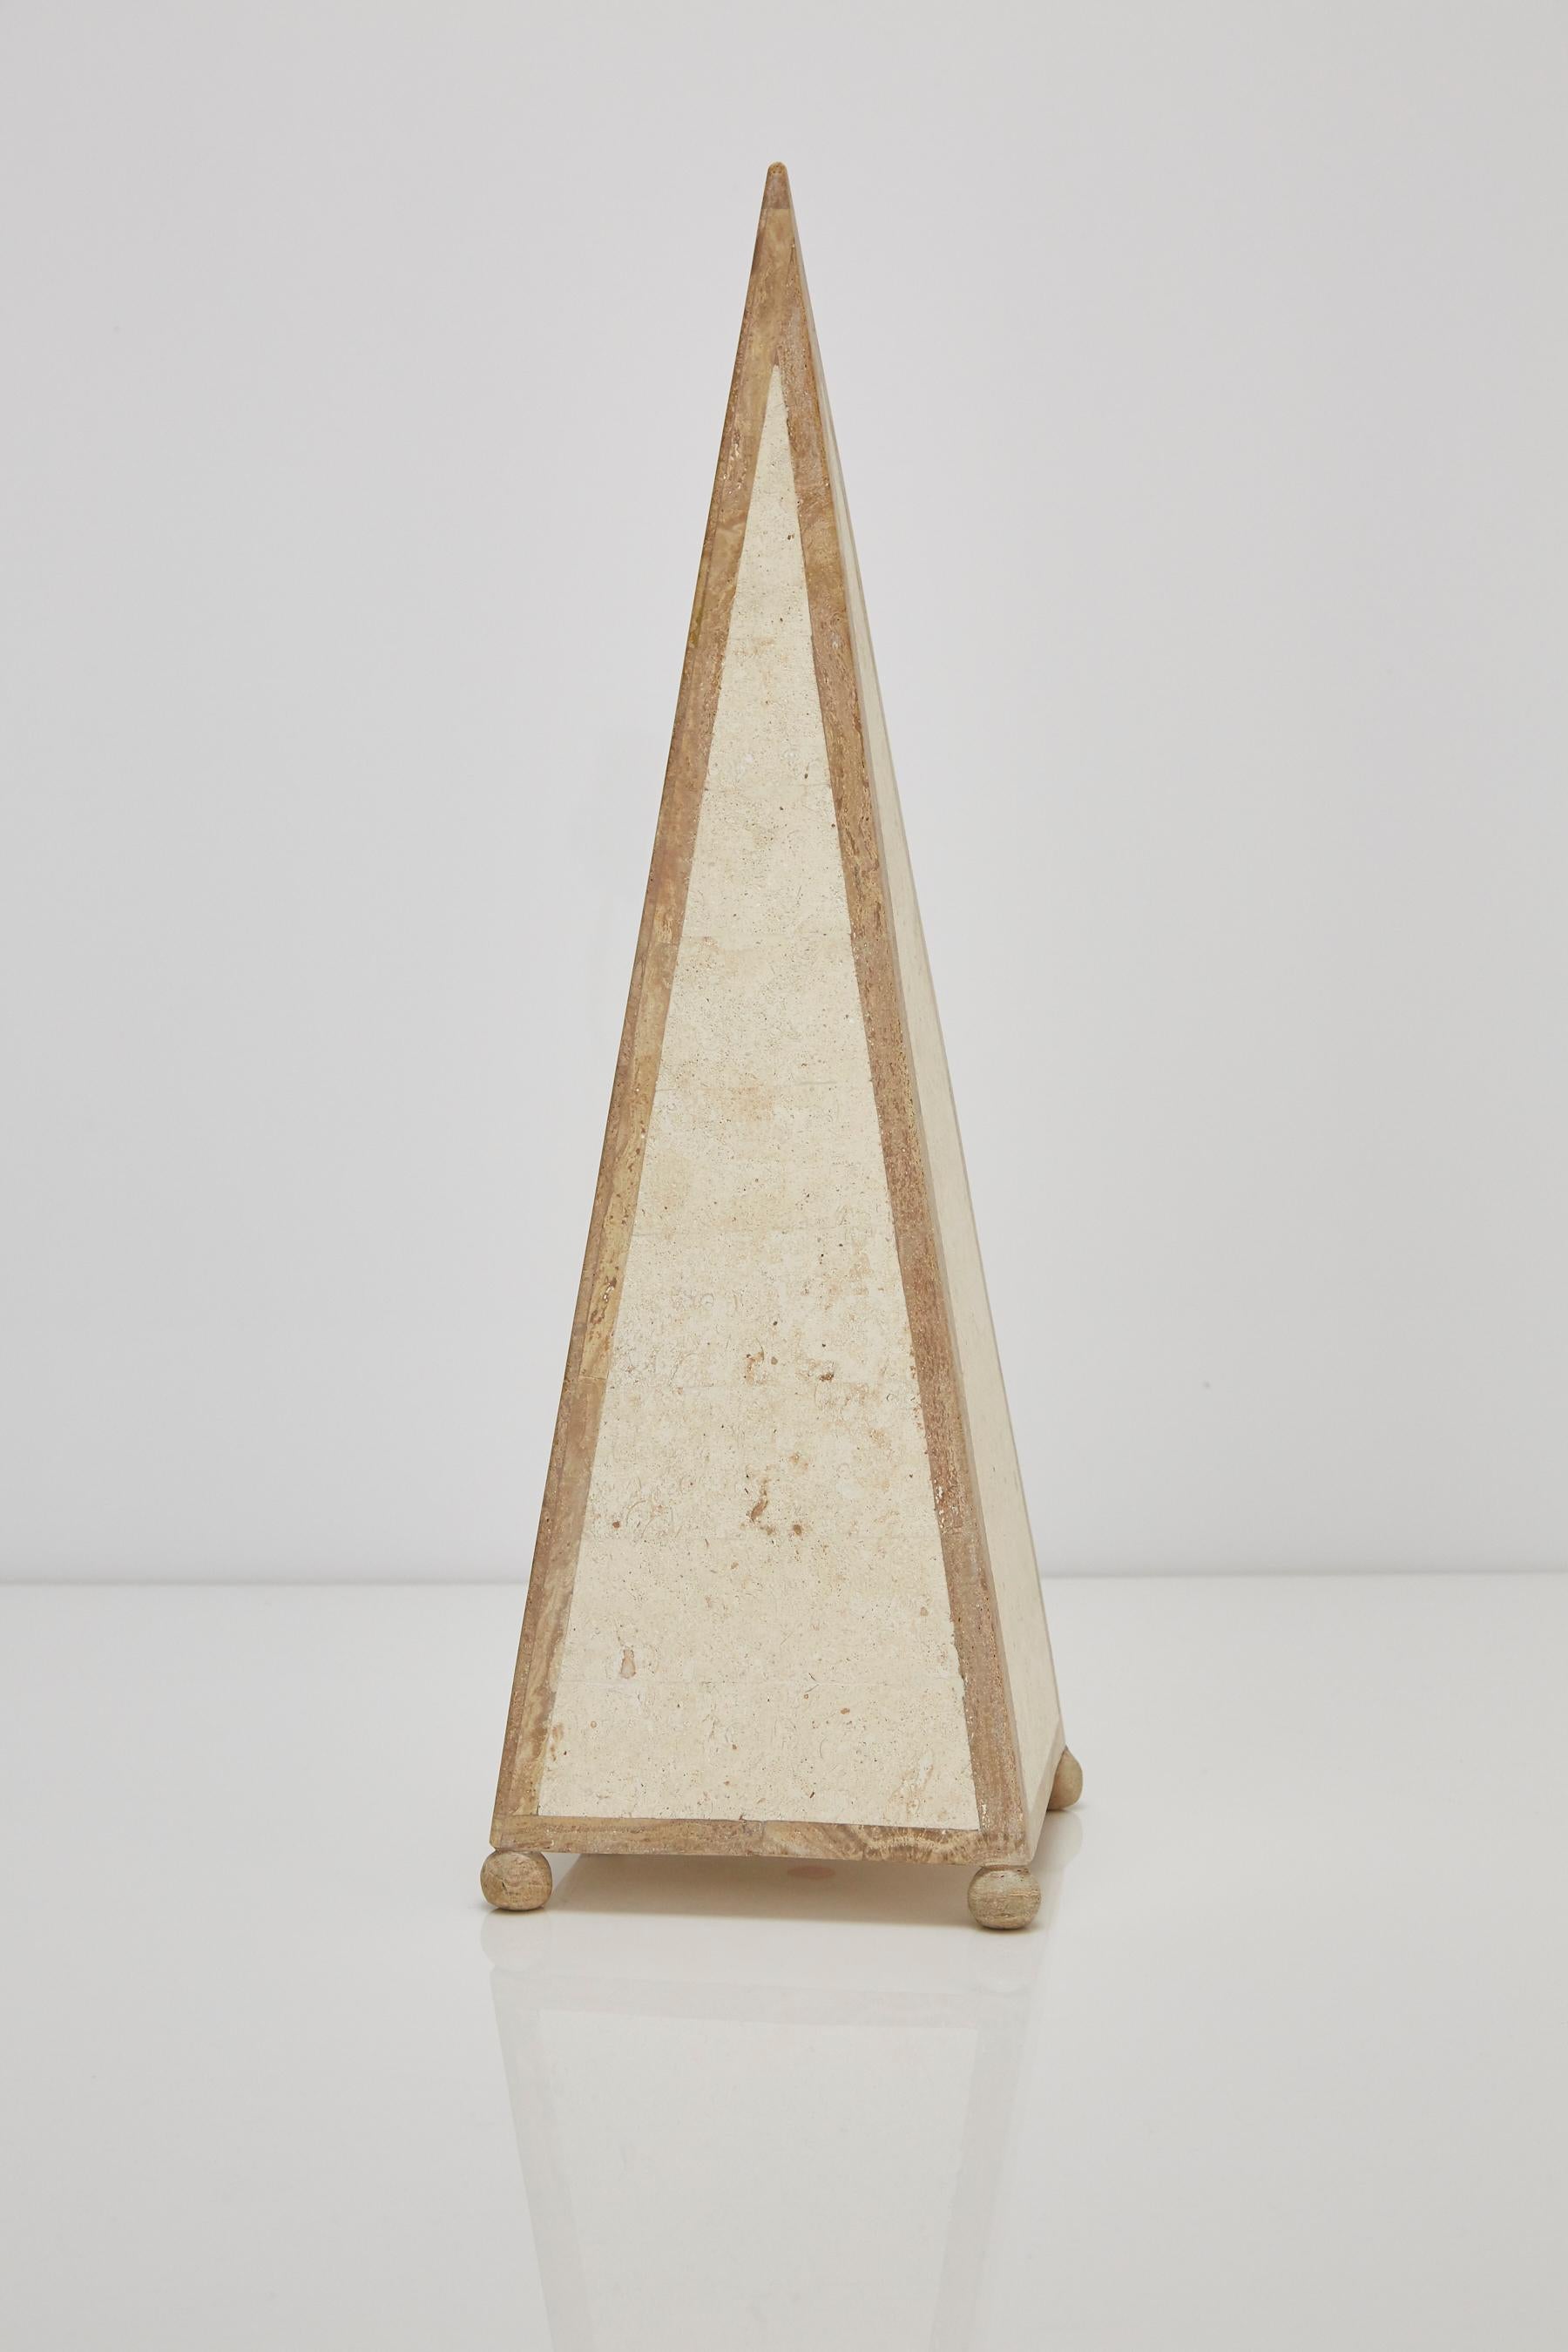 25 in. Tall Decorative Tessellated Stone Pyramid Obelisk, 1990s For Sale 2